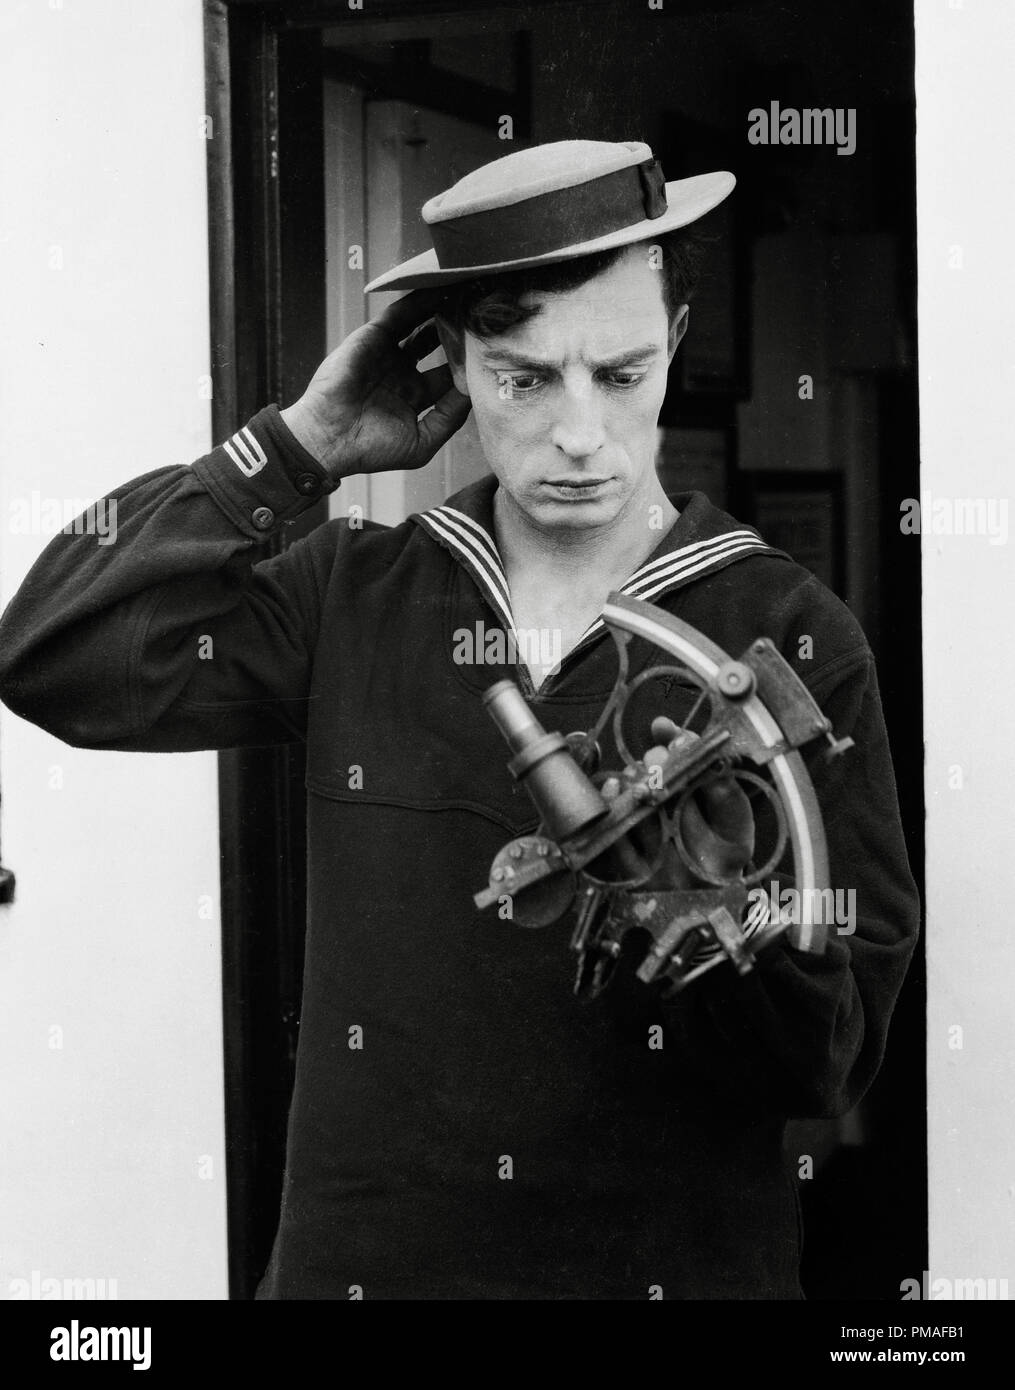 Buster Keaton Silent Film Star Actor Master of Comedy Mime Sad Expression  Photograph 1925